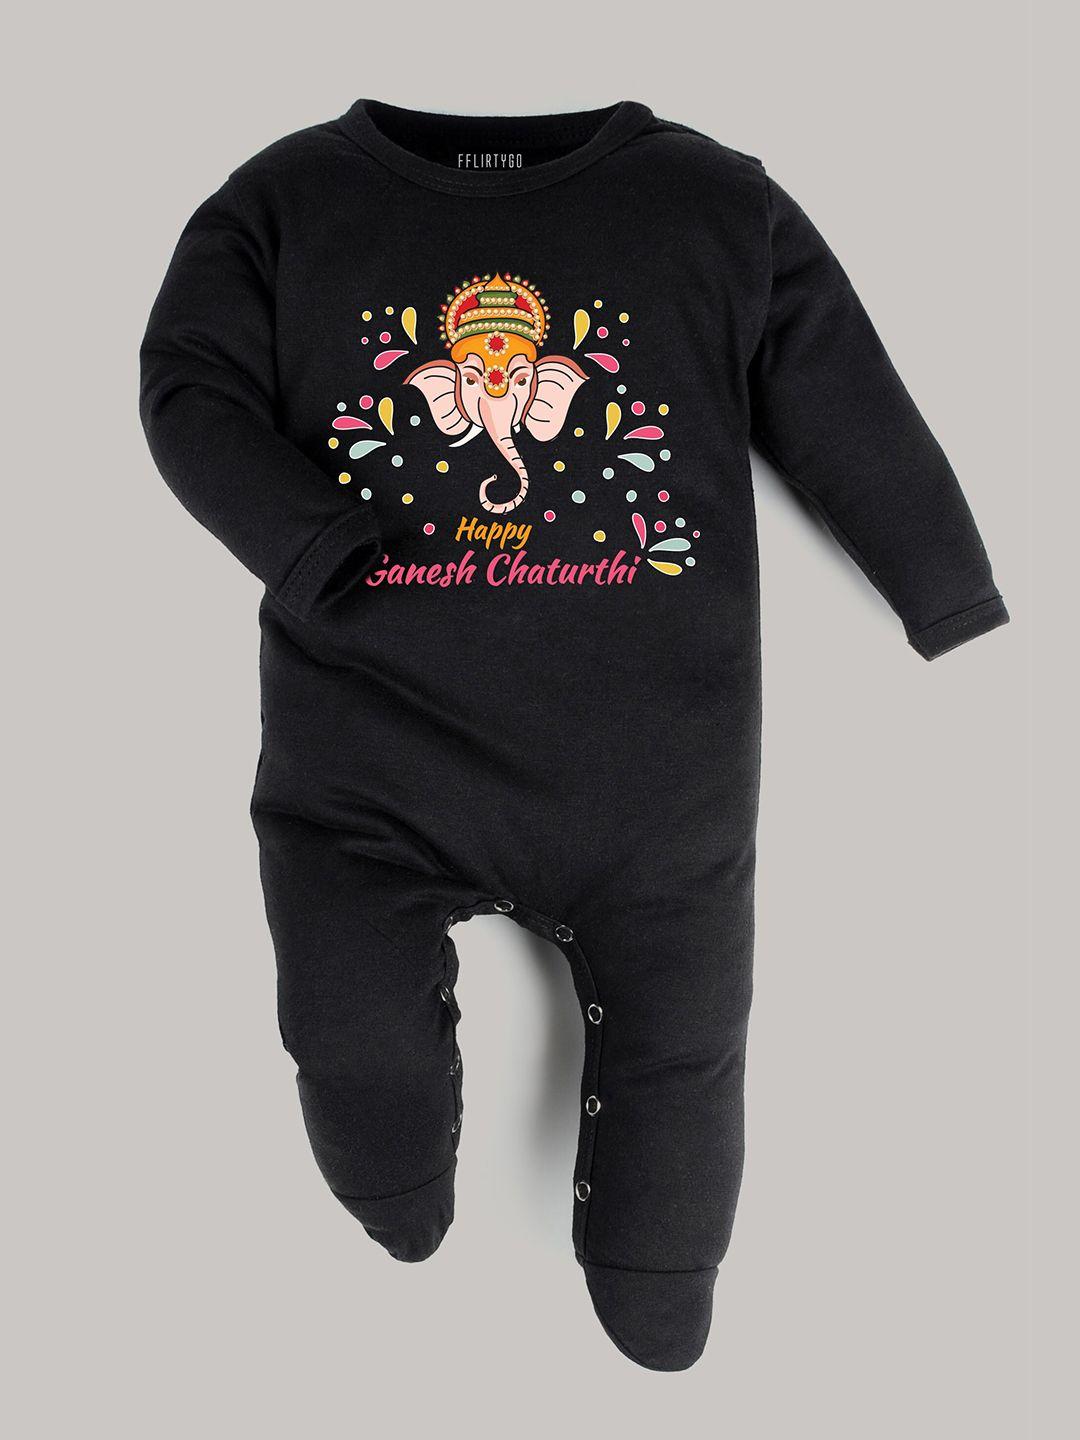 fflirtygo-infants-ganesh-chaturthi-special-printed-pure-cotton-rompers